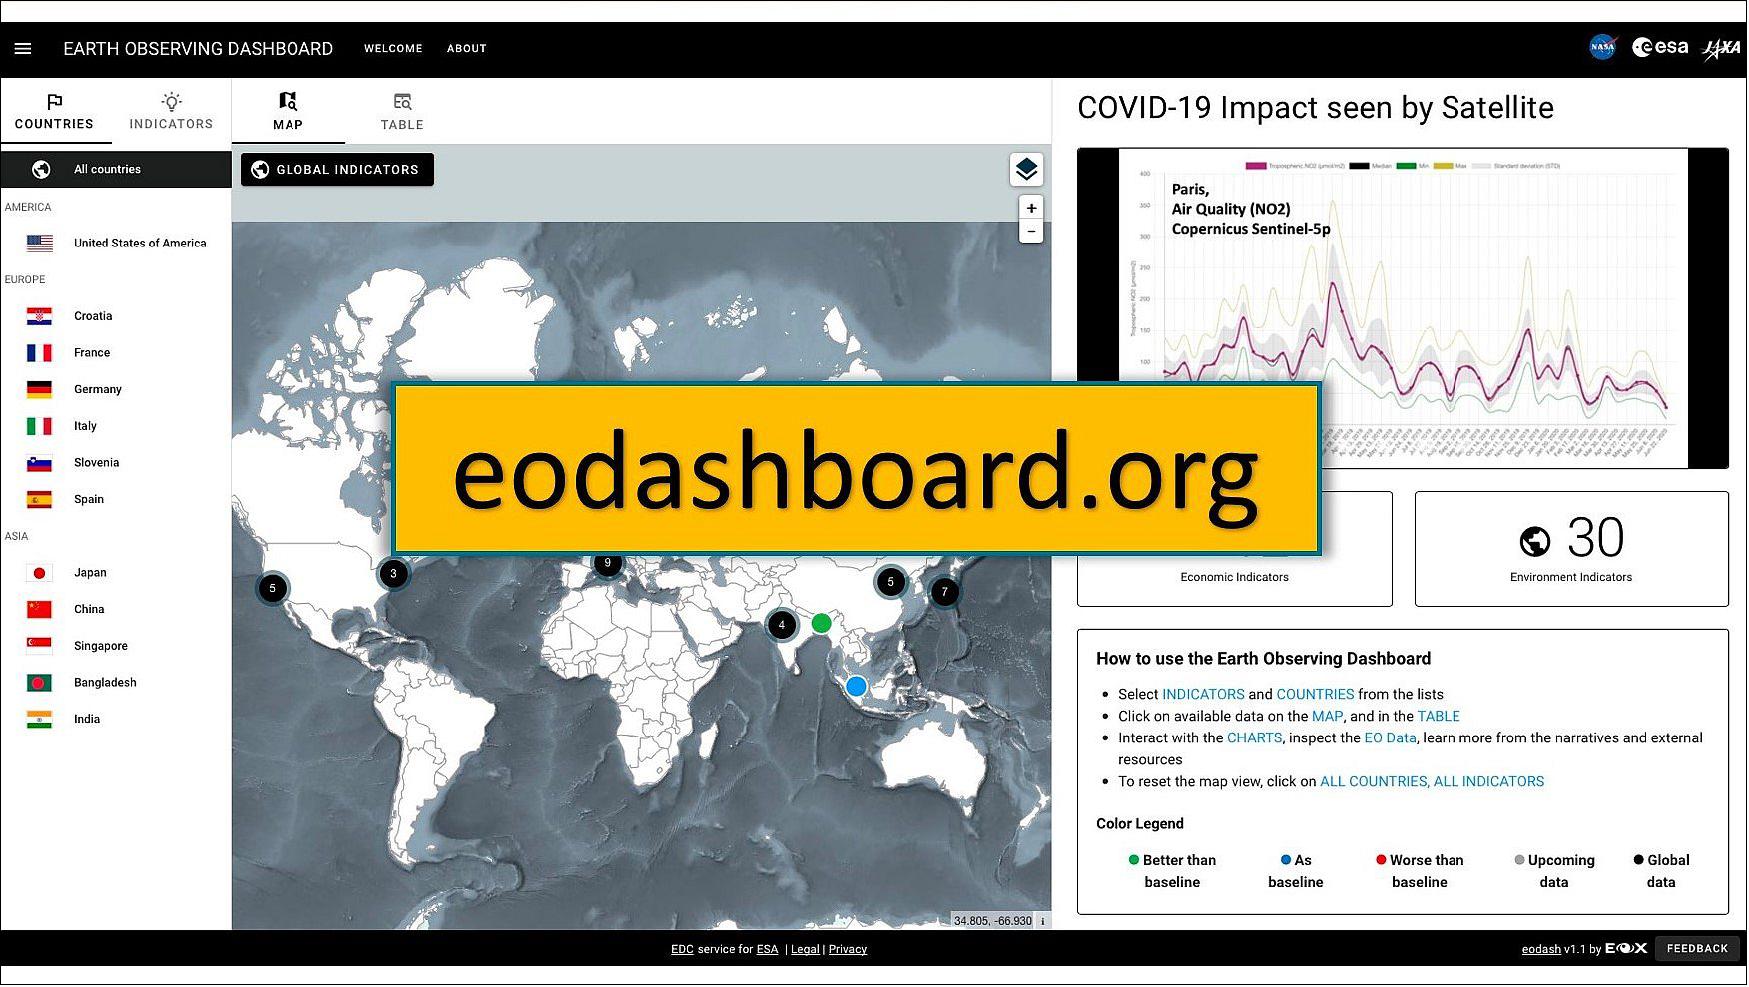 Figure 17: COVID-19 Earth Observation Dashboard users can filter and select data from Countries and Indicators lists, the map (center), or from the table view. Spotlight Areas are marked on the map, with a number shown of how many indicators are available in each area. The right panel displays the indicator data and provides additional information (image credit: NASA/ESA/JAXA, Anca Anghelea)